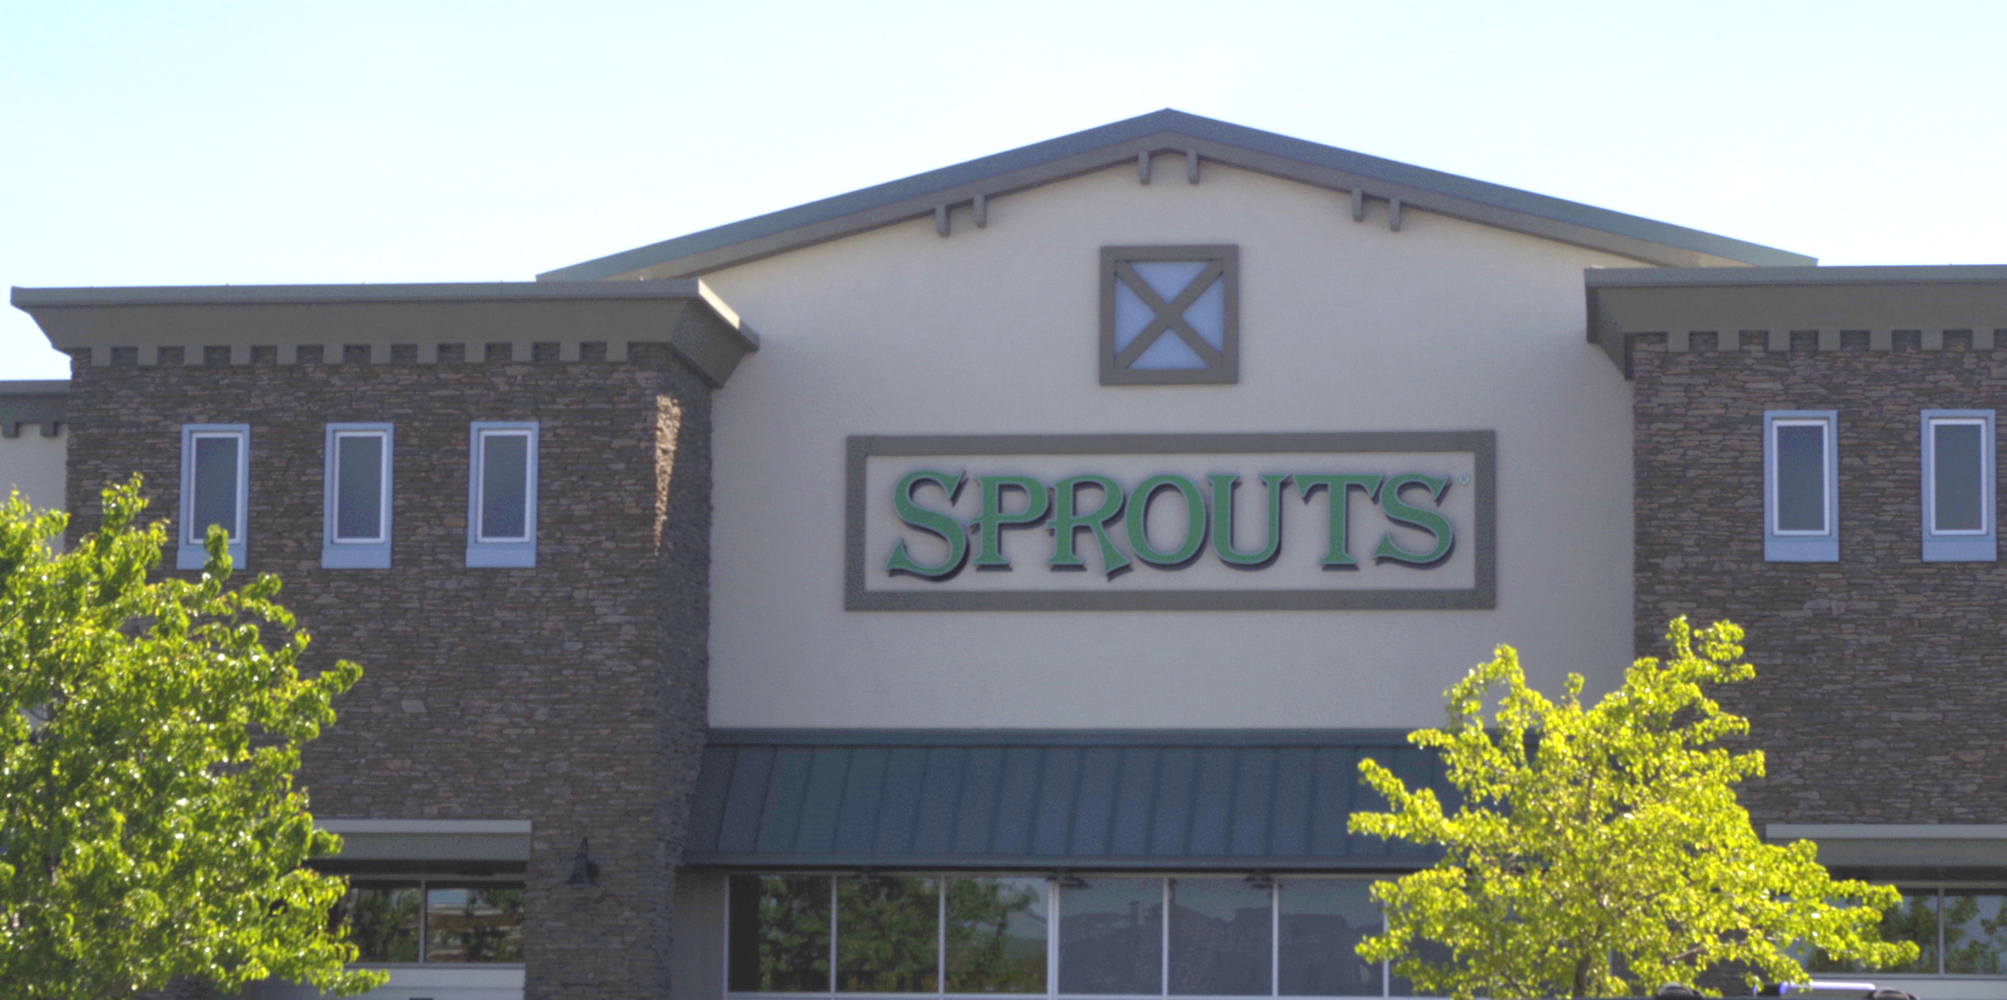 Sprouts Front of building